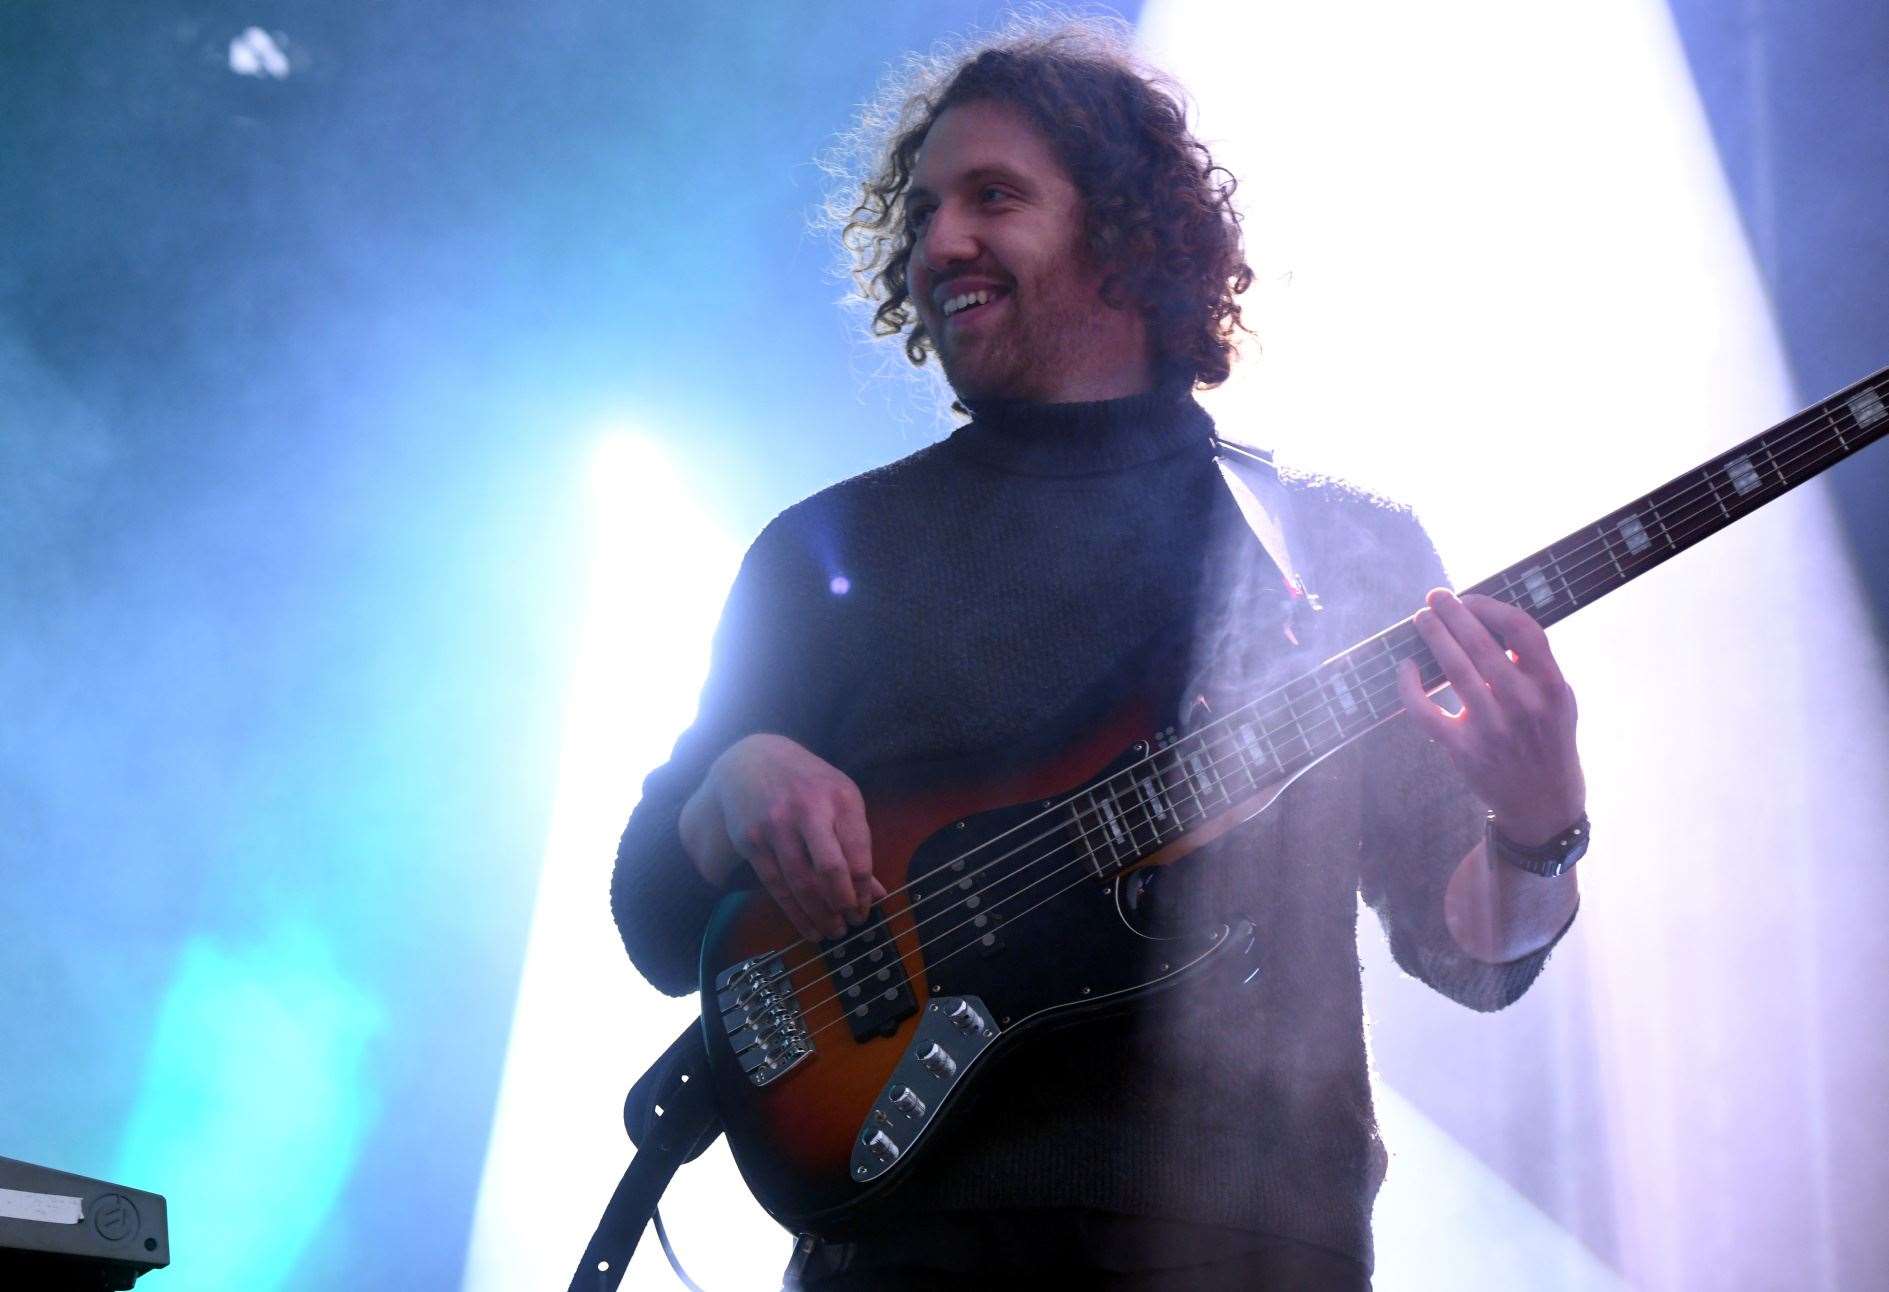 Elephant Sessions' bassist Seth Tinsley at The Gathering. Picture: James Mackenzie